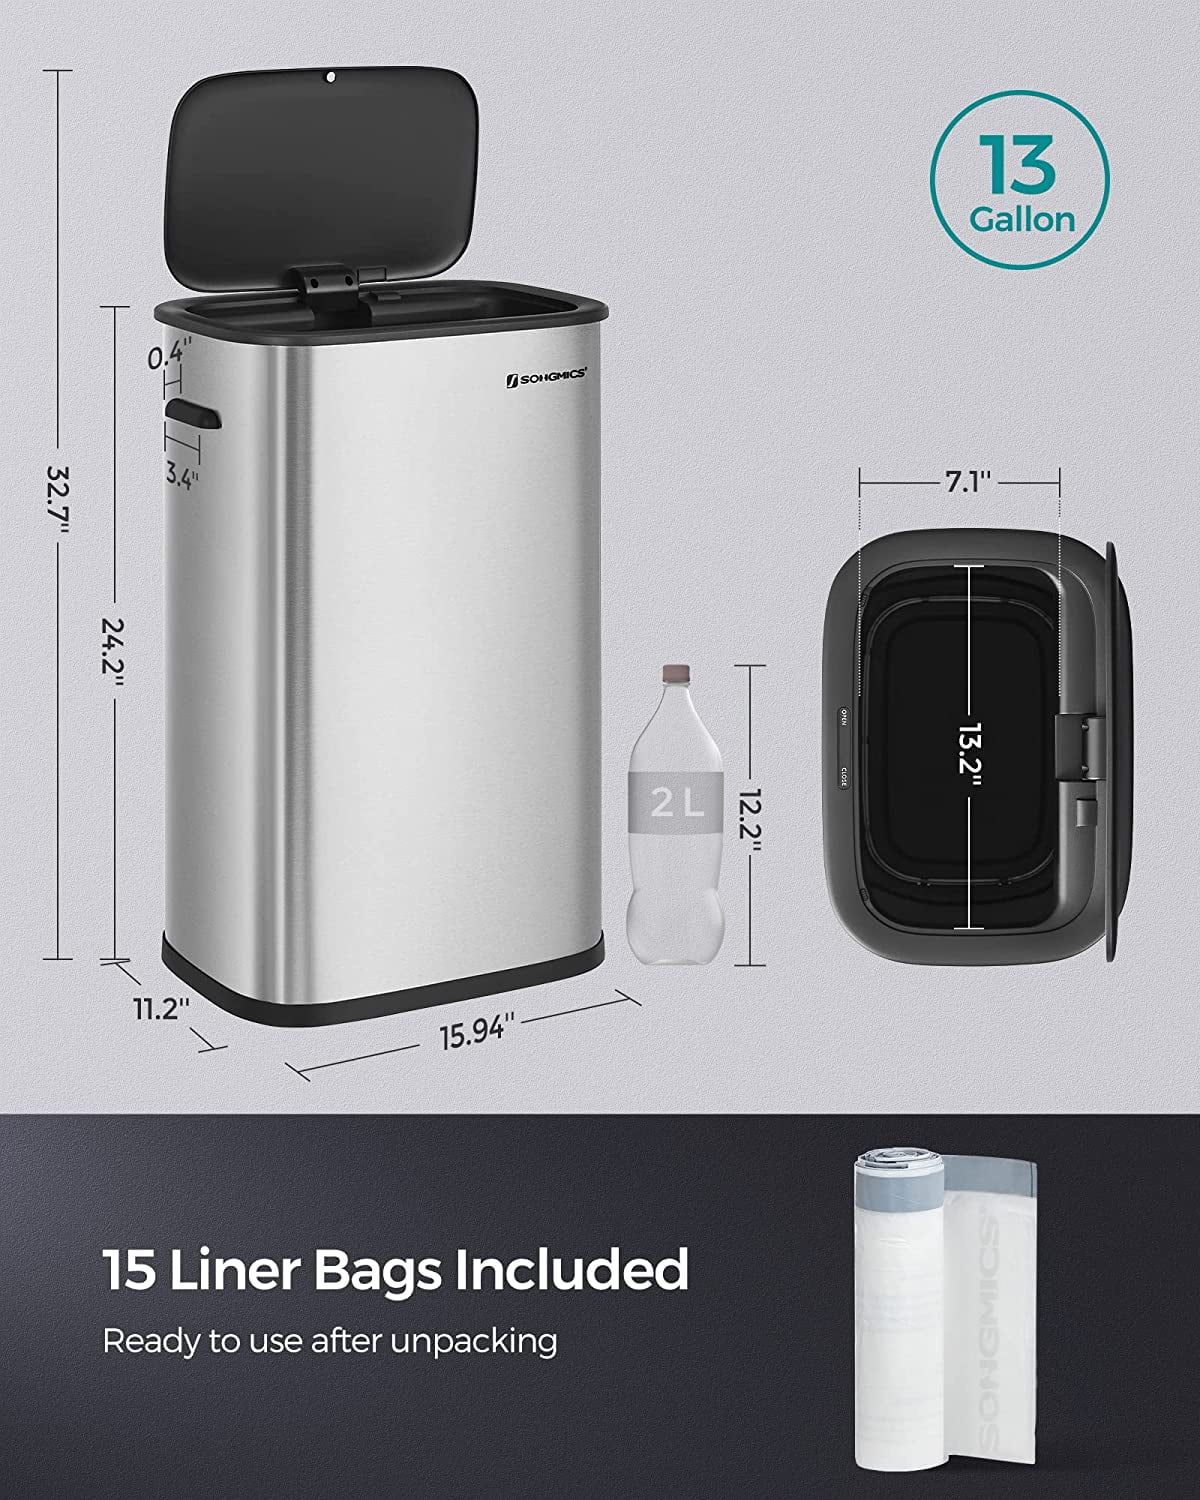 SONGMICS 13 Gallon White Step Trash Can: Tried & Tested